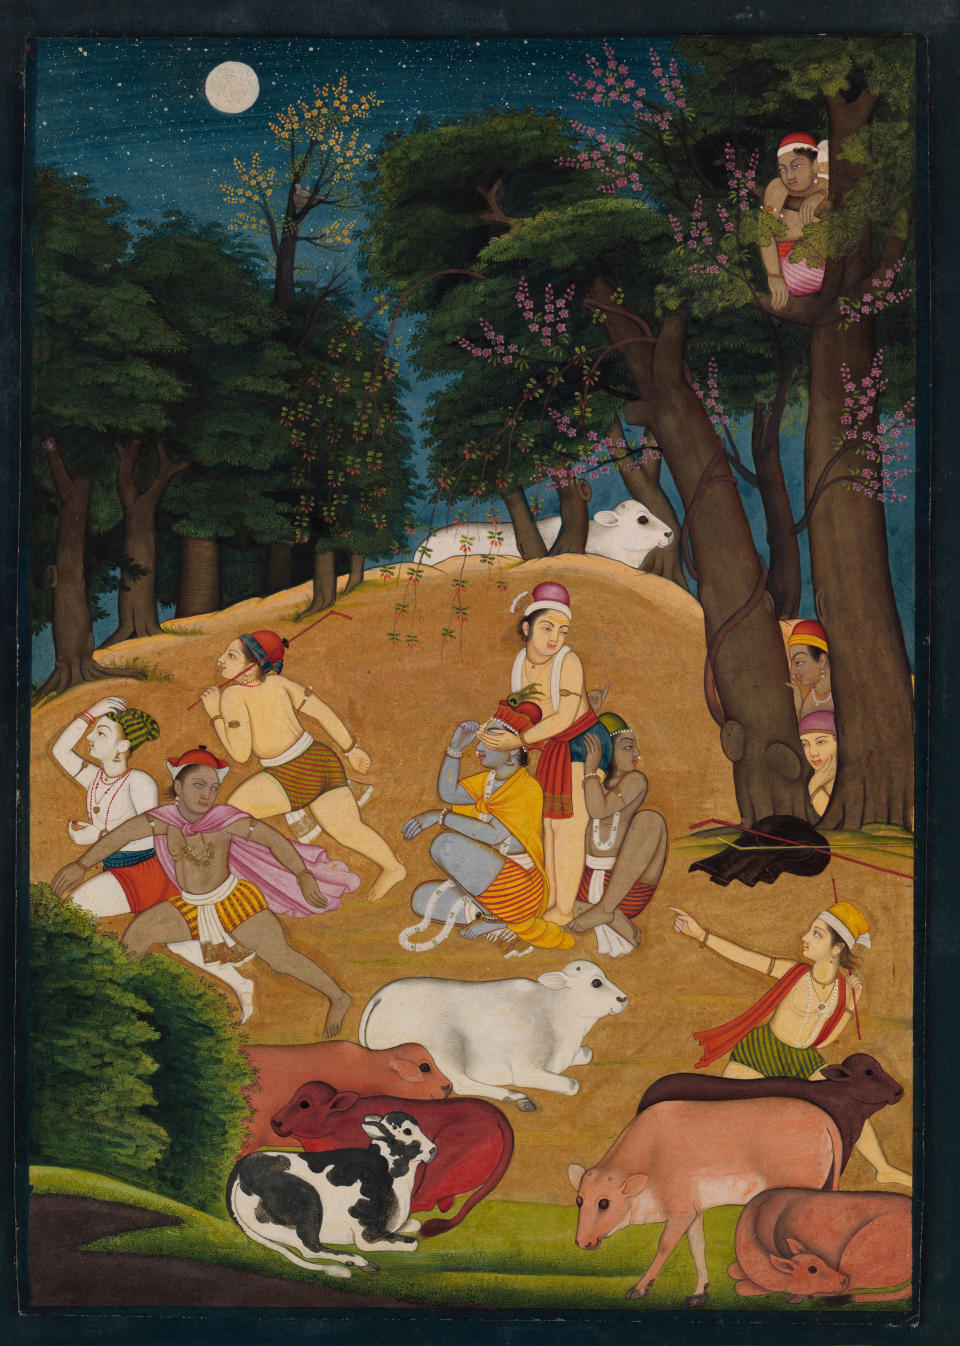 "Hide-and-Seek: Krishna Playing a Game with the&nbsp;Gopas (Cowherds)"&nbsp;Ascribed to the artist Manaku (ca. 1700&ndash;ca. 1760)&nbsp;Punjab Hills, kingdom of Guler, ca. 1750&ndash;55.&nbsp;Opaque watercolor, ink, and gold on paper; narrow&nbsp;dark blue border (probably trimmed); painting 9 5/8 x 6. Promised Gift of the Kronos Collections, 2015.